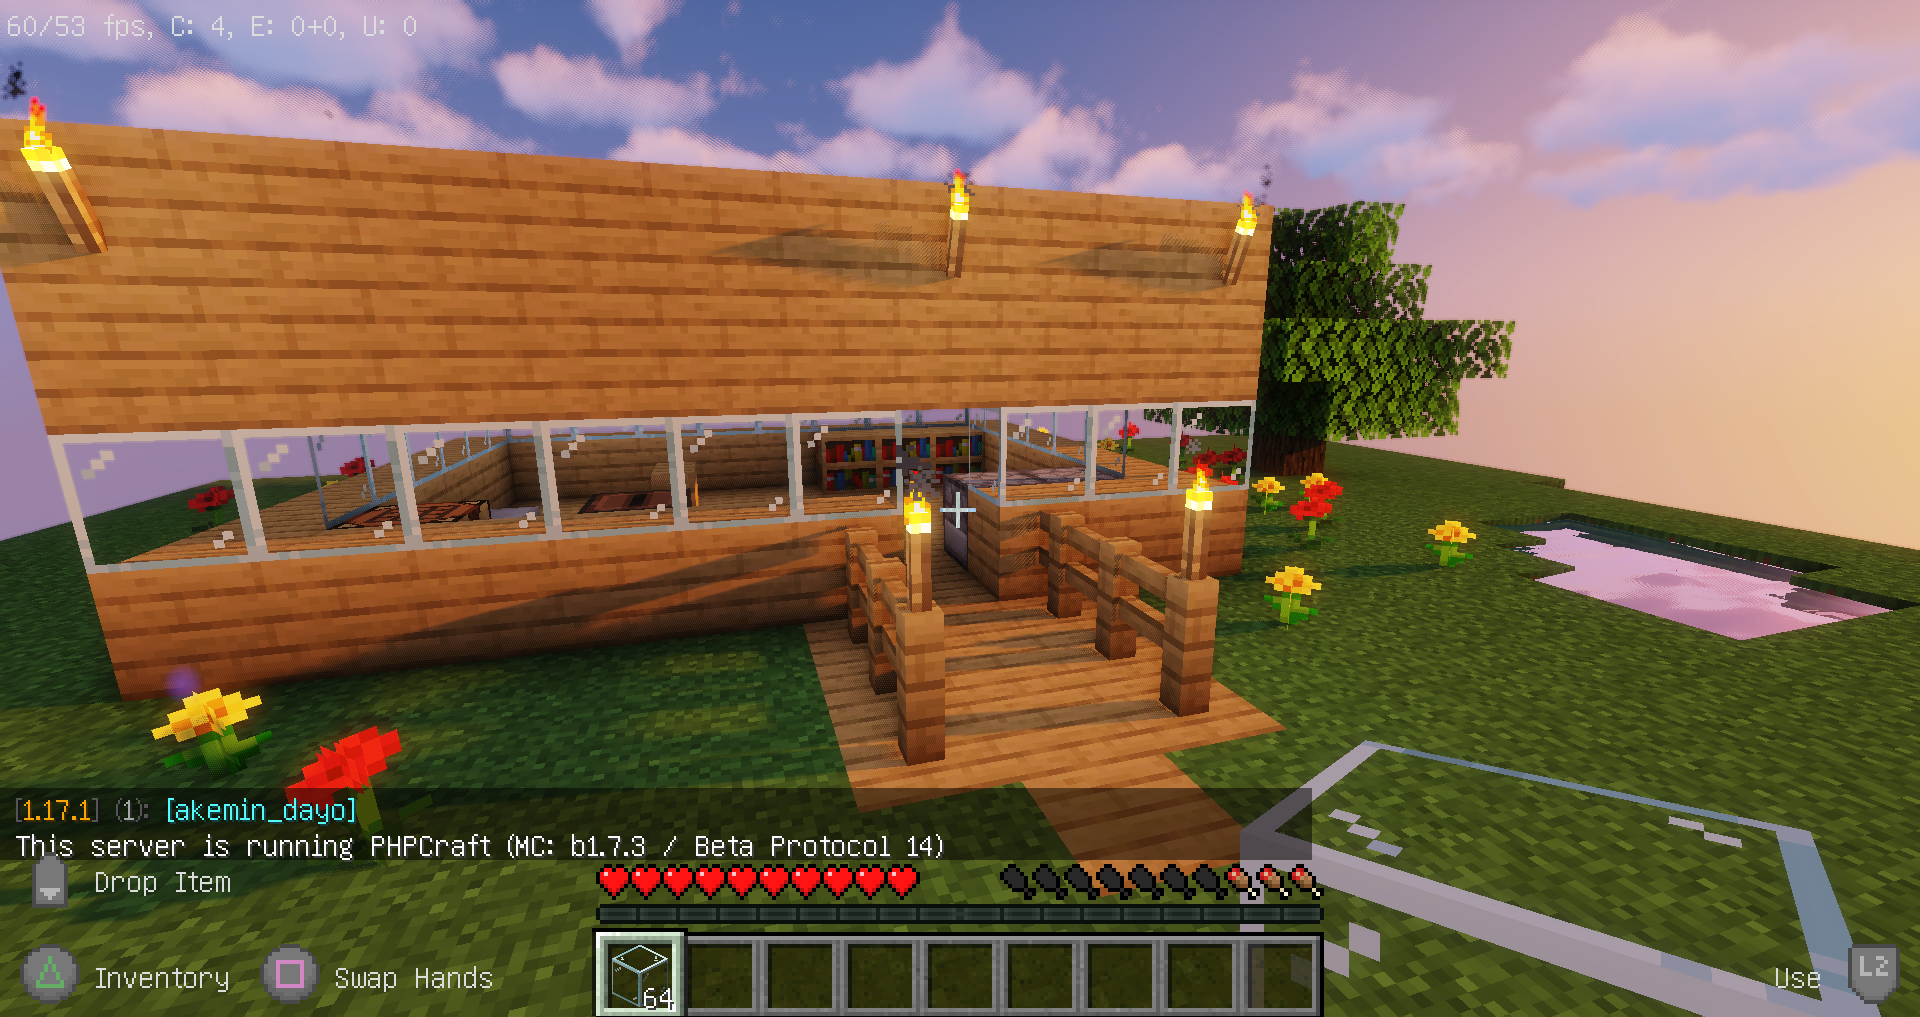 A screenshot of Minecraft 1.17.1 connected to a PHPCraft server, showing a small house that was built from wood planks, a small pond, a tree, and various rose and dandelion flowers scattered about.